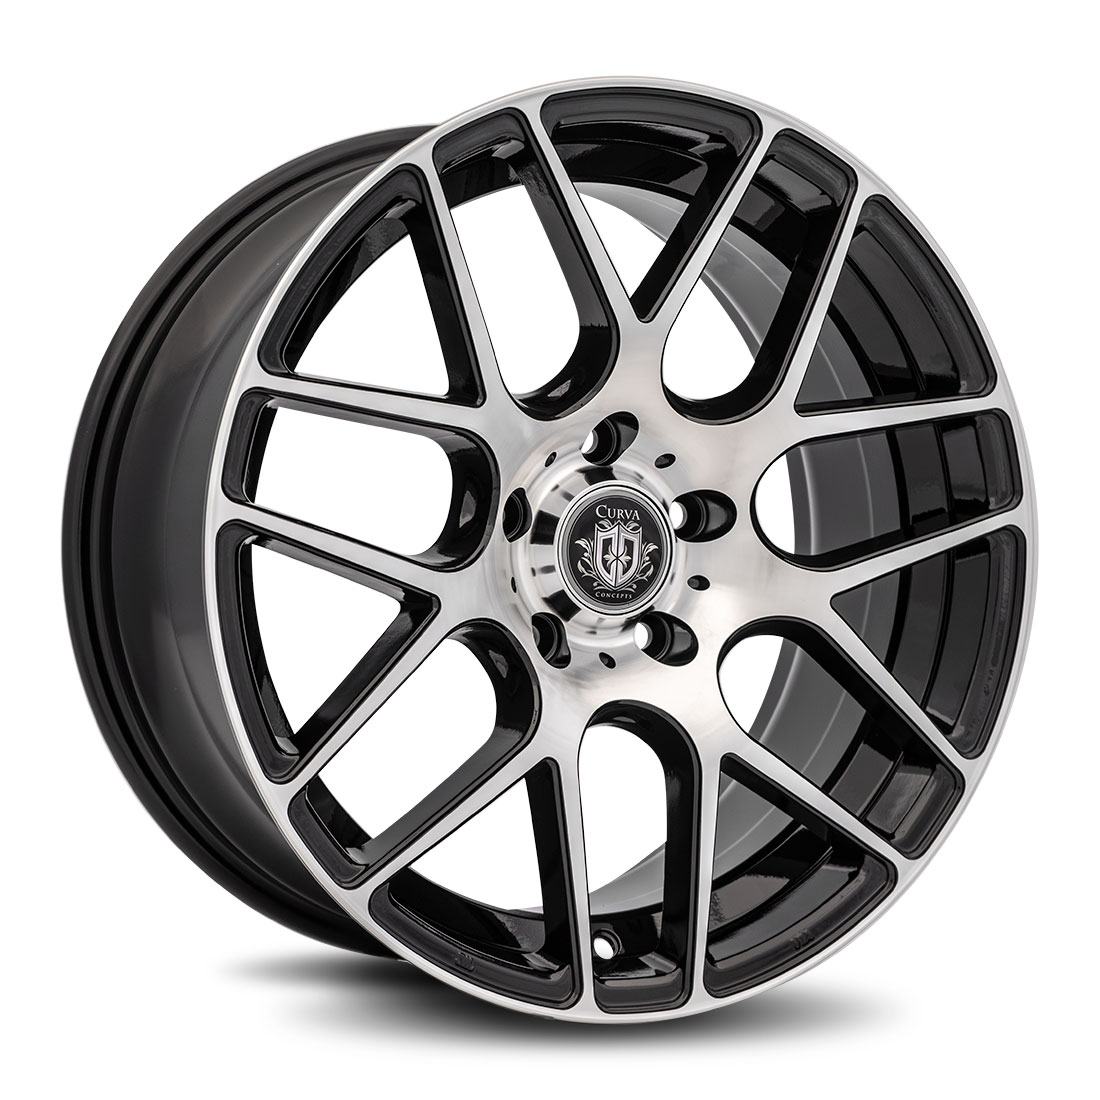 Curva Concepts C7 Aftermarket Wheels 18 Inch Black Machined Face